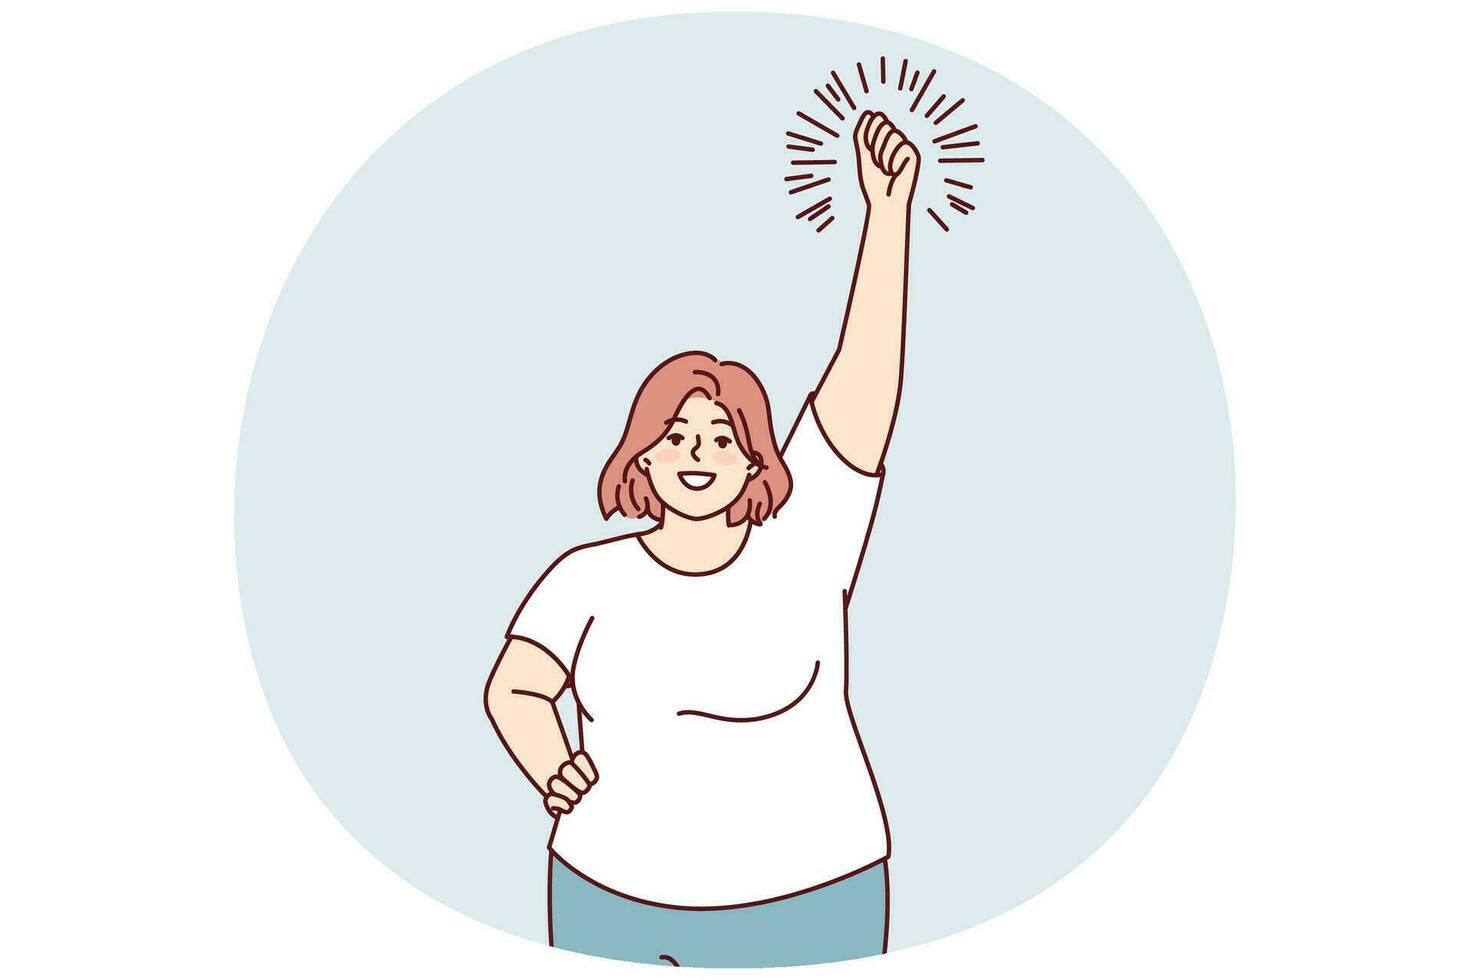 Smiling big size woman doing warm-up raising hands up leads active lifestyle. Vector image